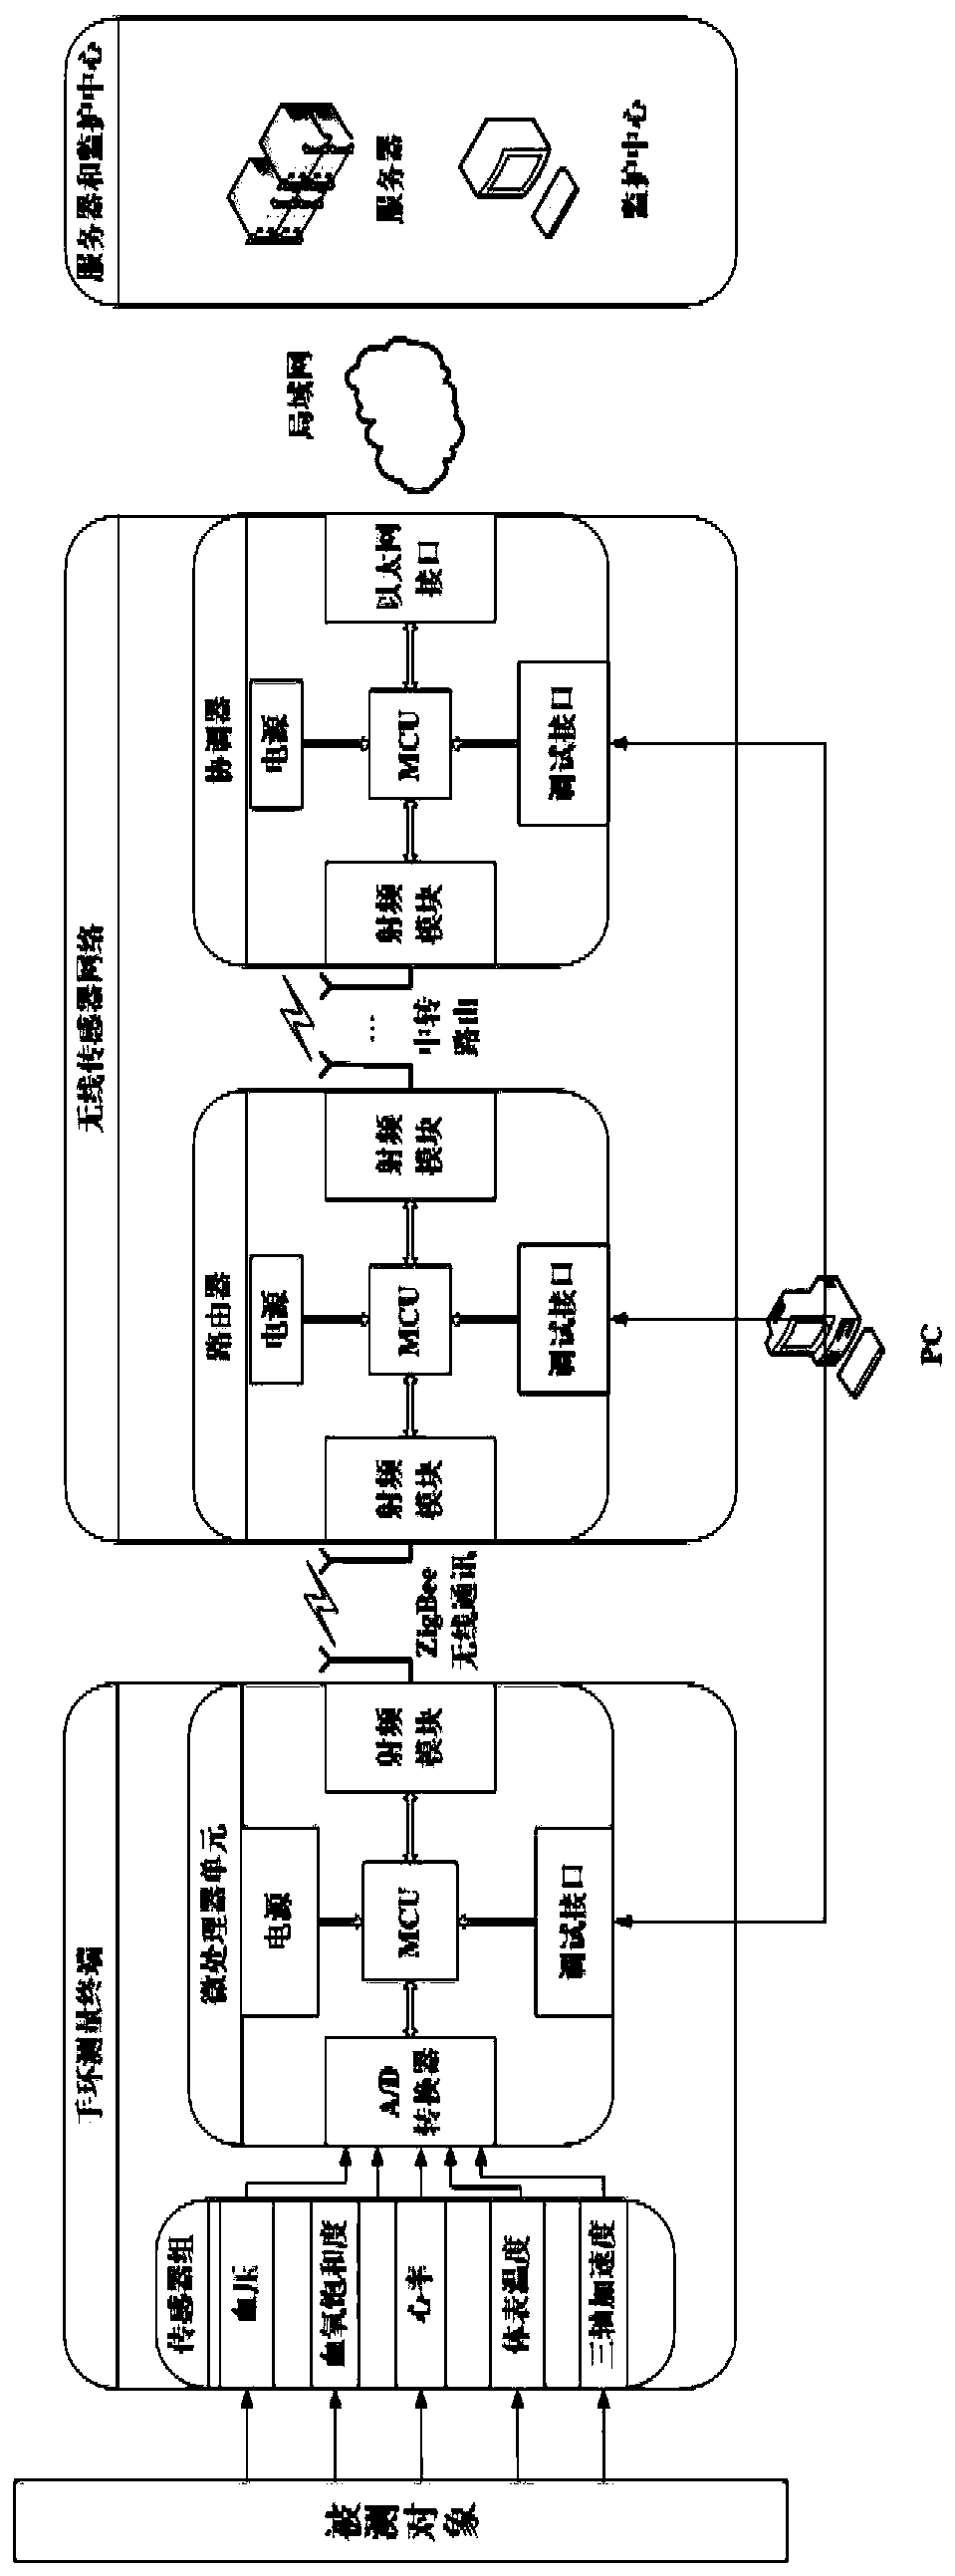 Sign information monitoring method and system based on multiple physiological parameters and CNN